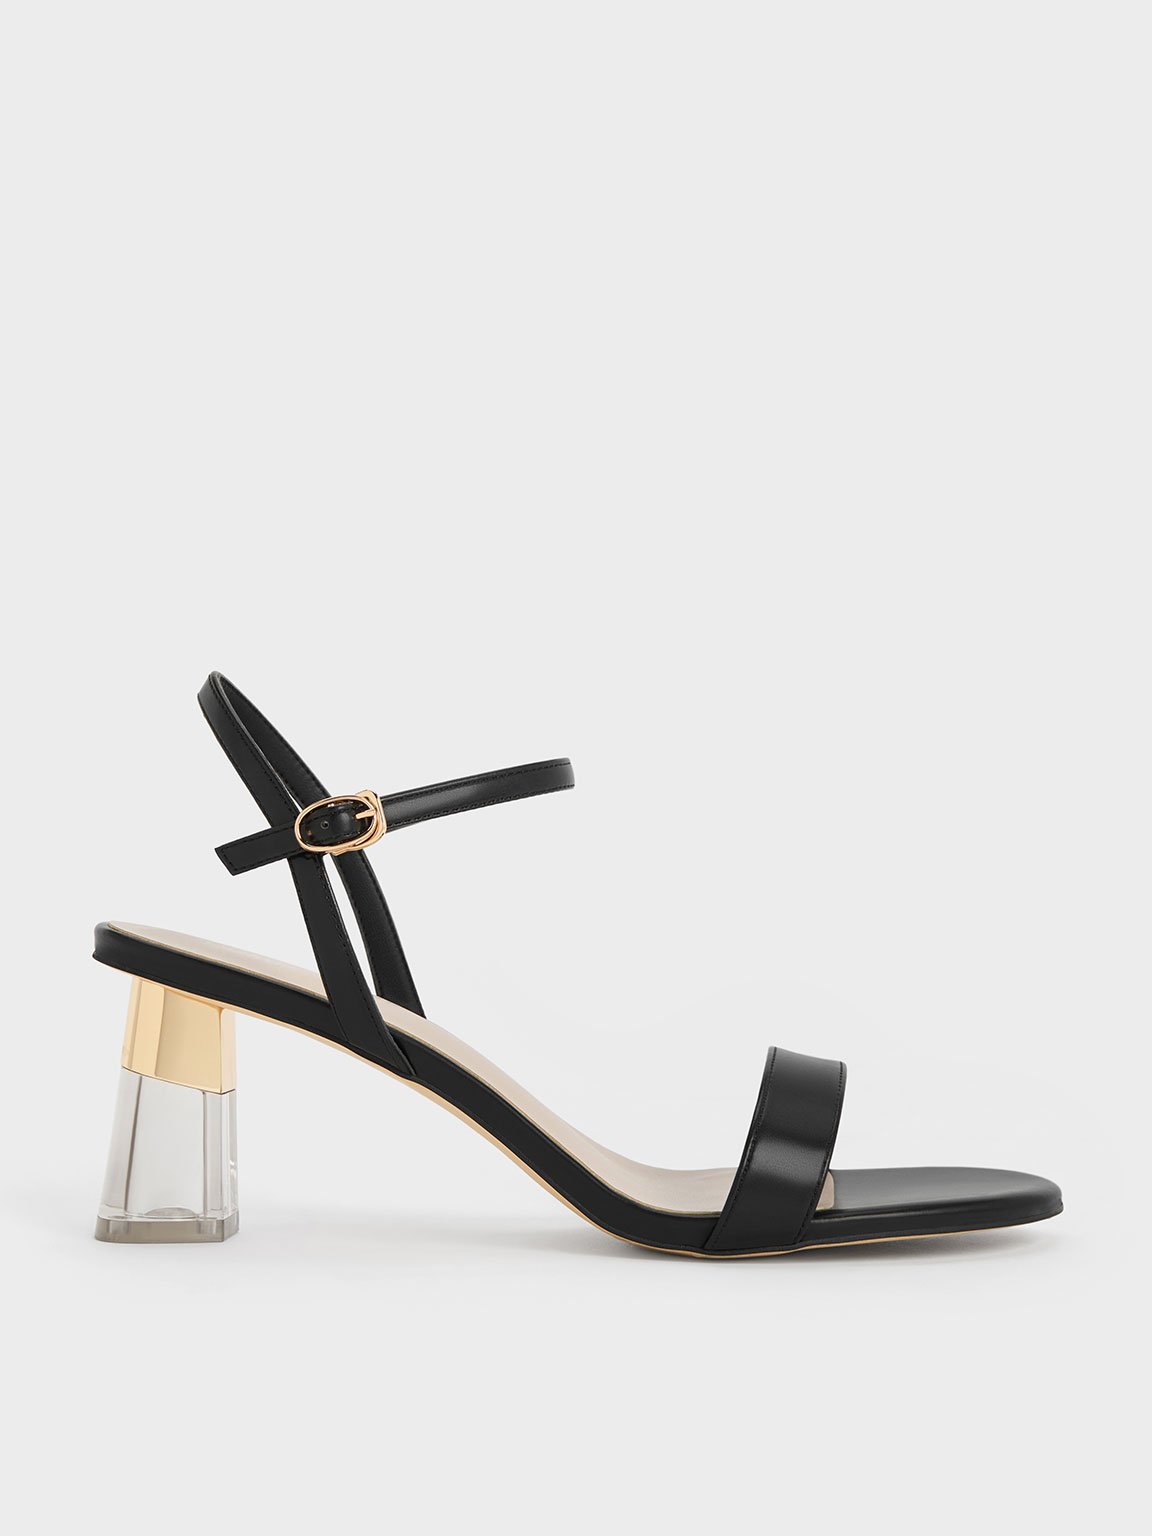 Black Clear Trapeze Heel Sandals - CHARLES & KEITH US